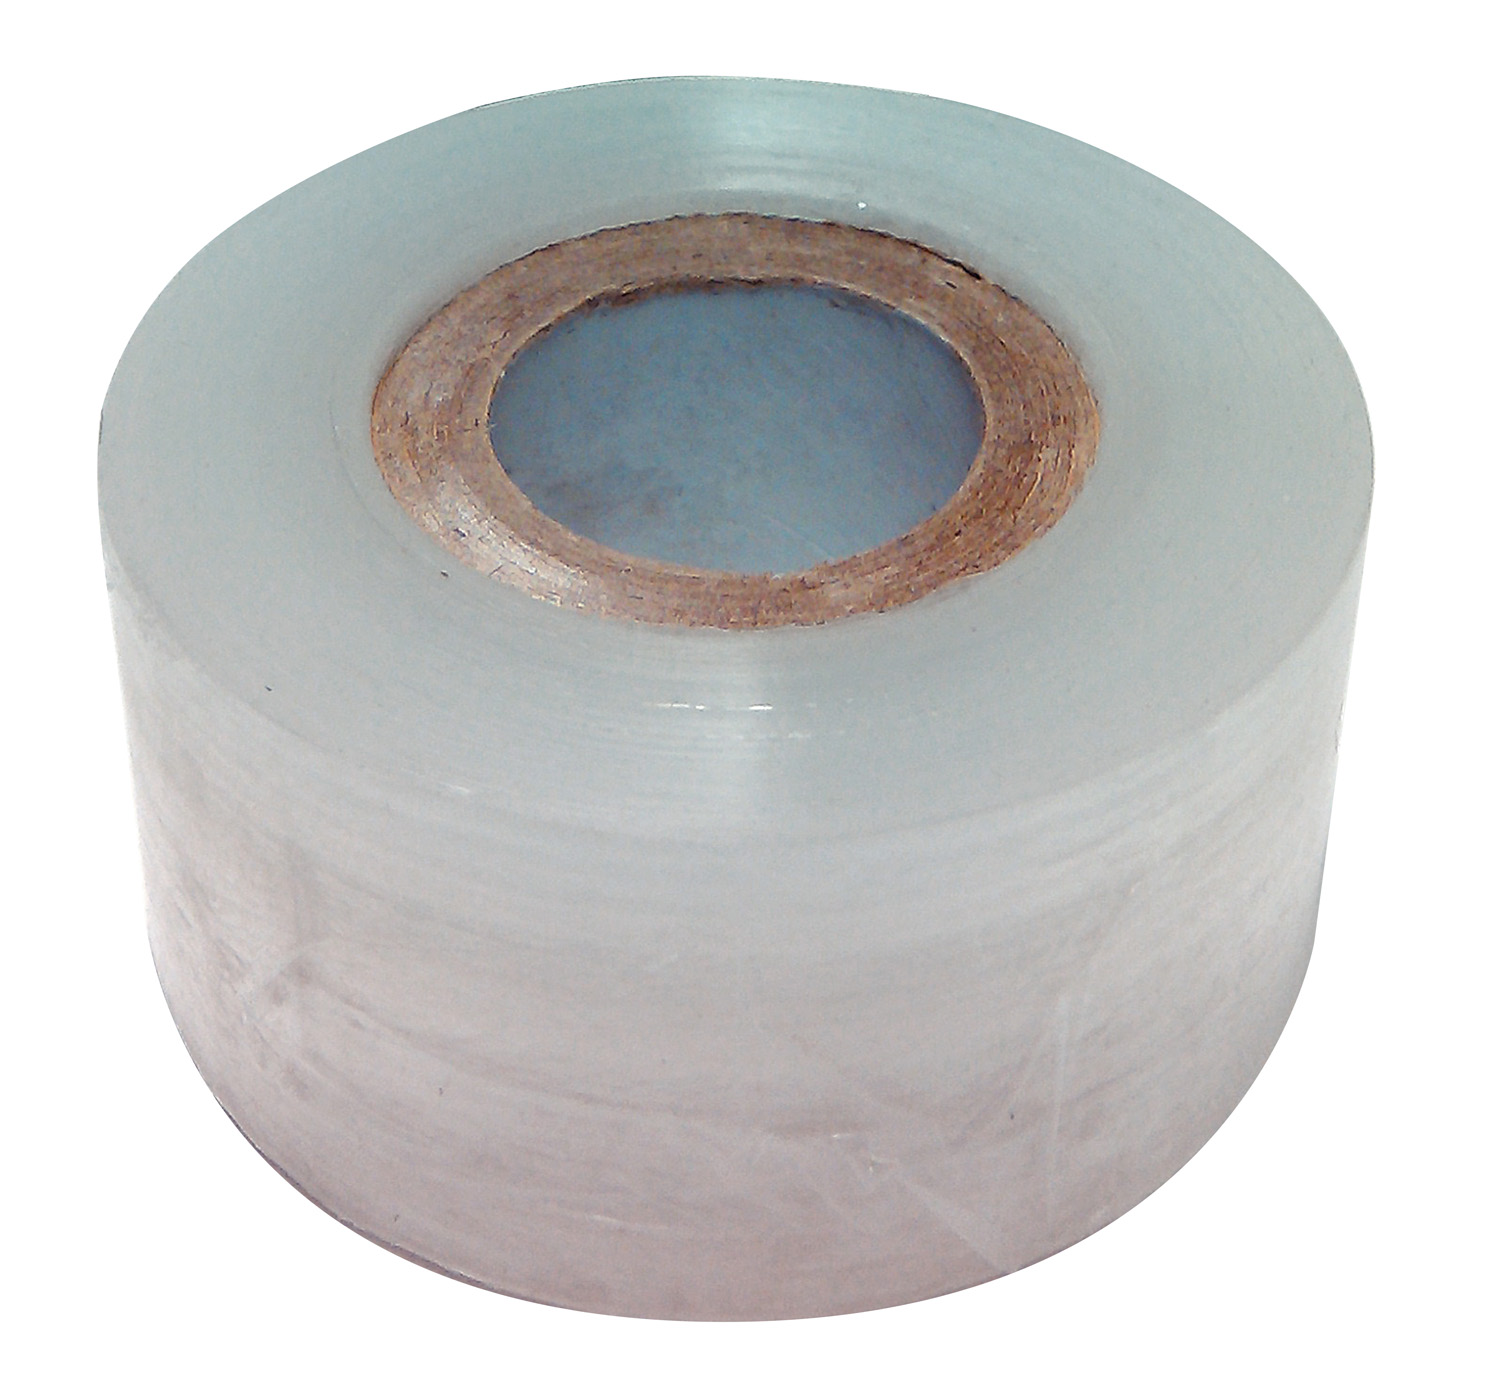 Zenport Grafting Tape ZJ825 Film Grafting Tape, 1.2-Inches Wide by 426-Feet Long